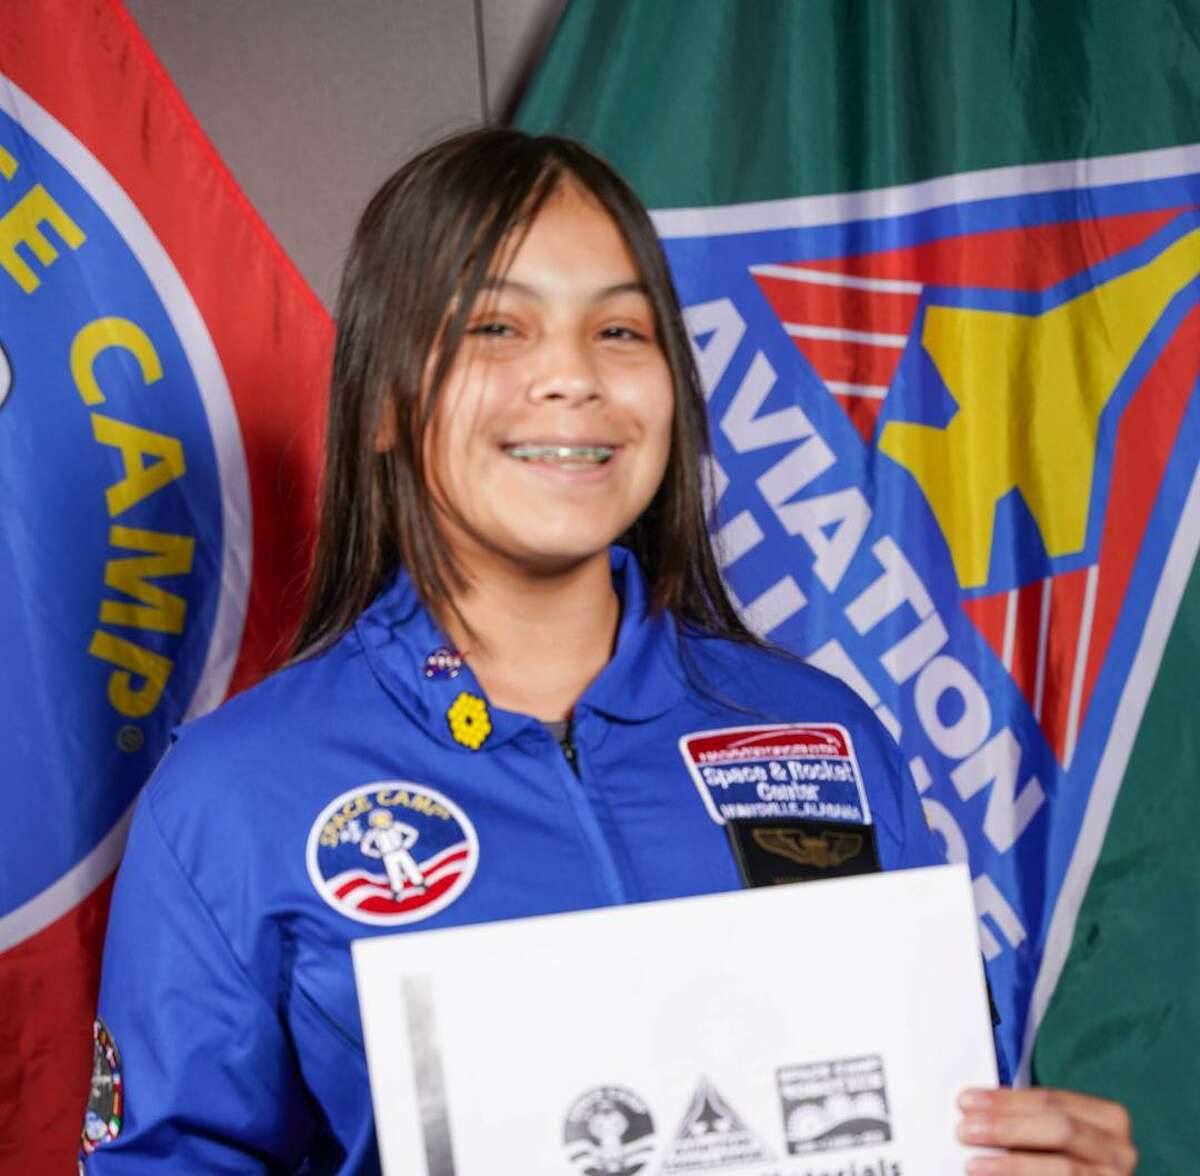 Norwalk's Brien McMahon student Maria-Cecilia Rivera, known as "Marcie," spent part of her summer at space camp in Alabama learning about space and engineering.